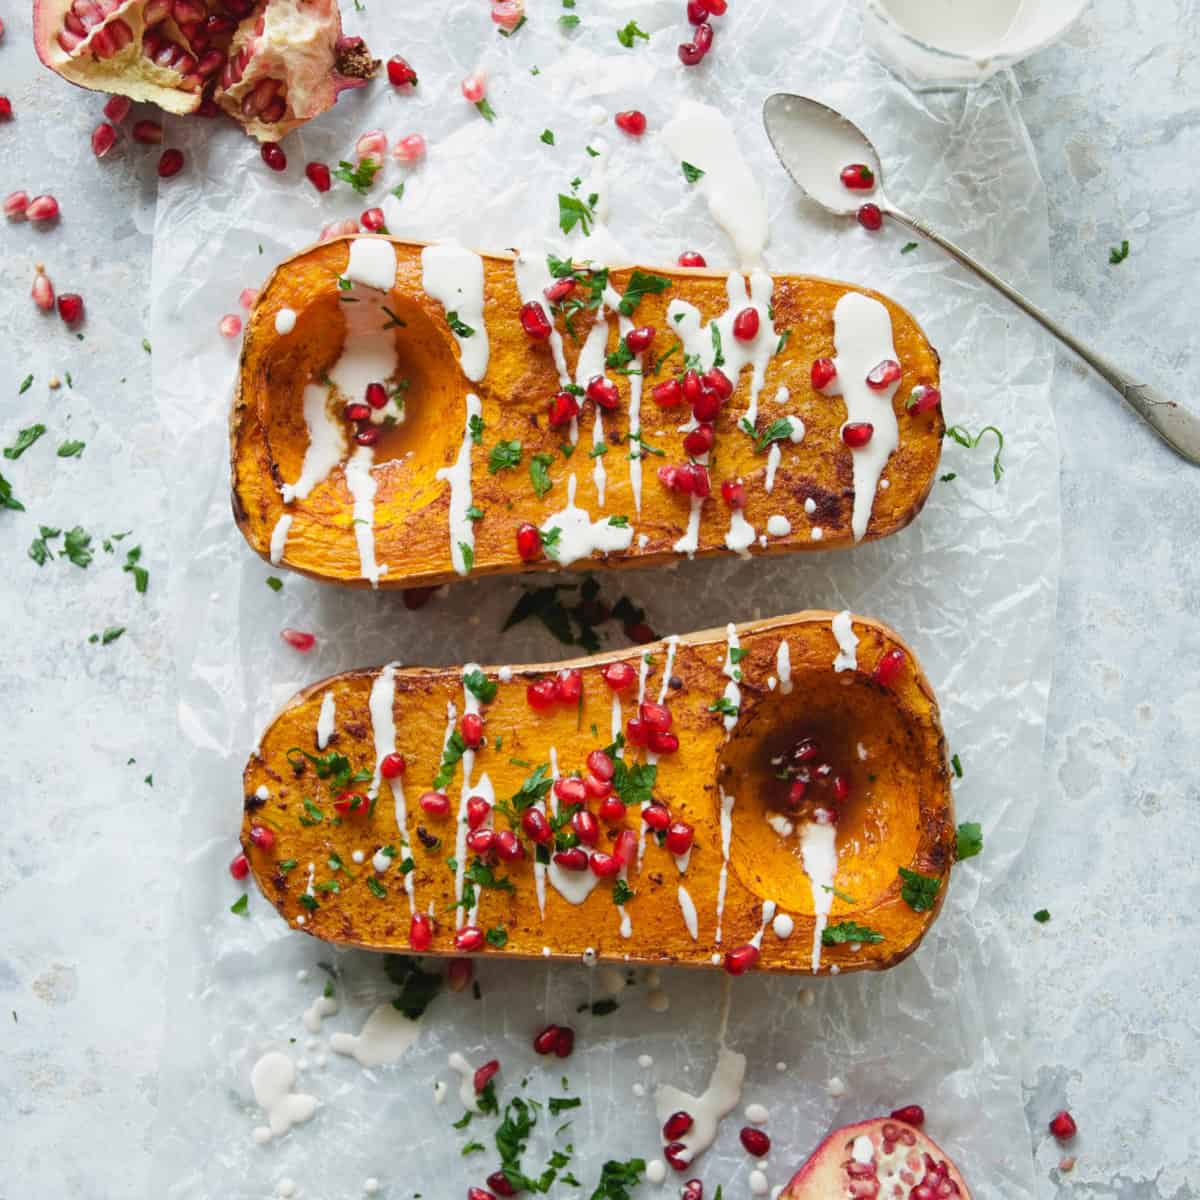 Maple Roasted Butternut Squash with Cream and Pomegranate from Sweet Laurel